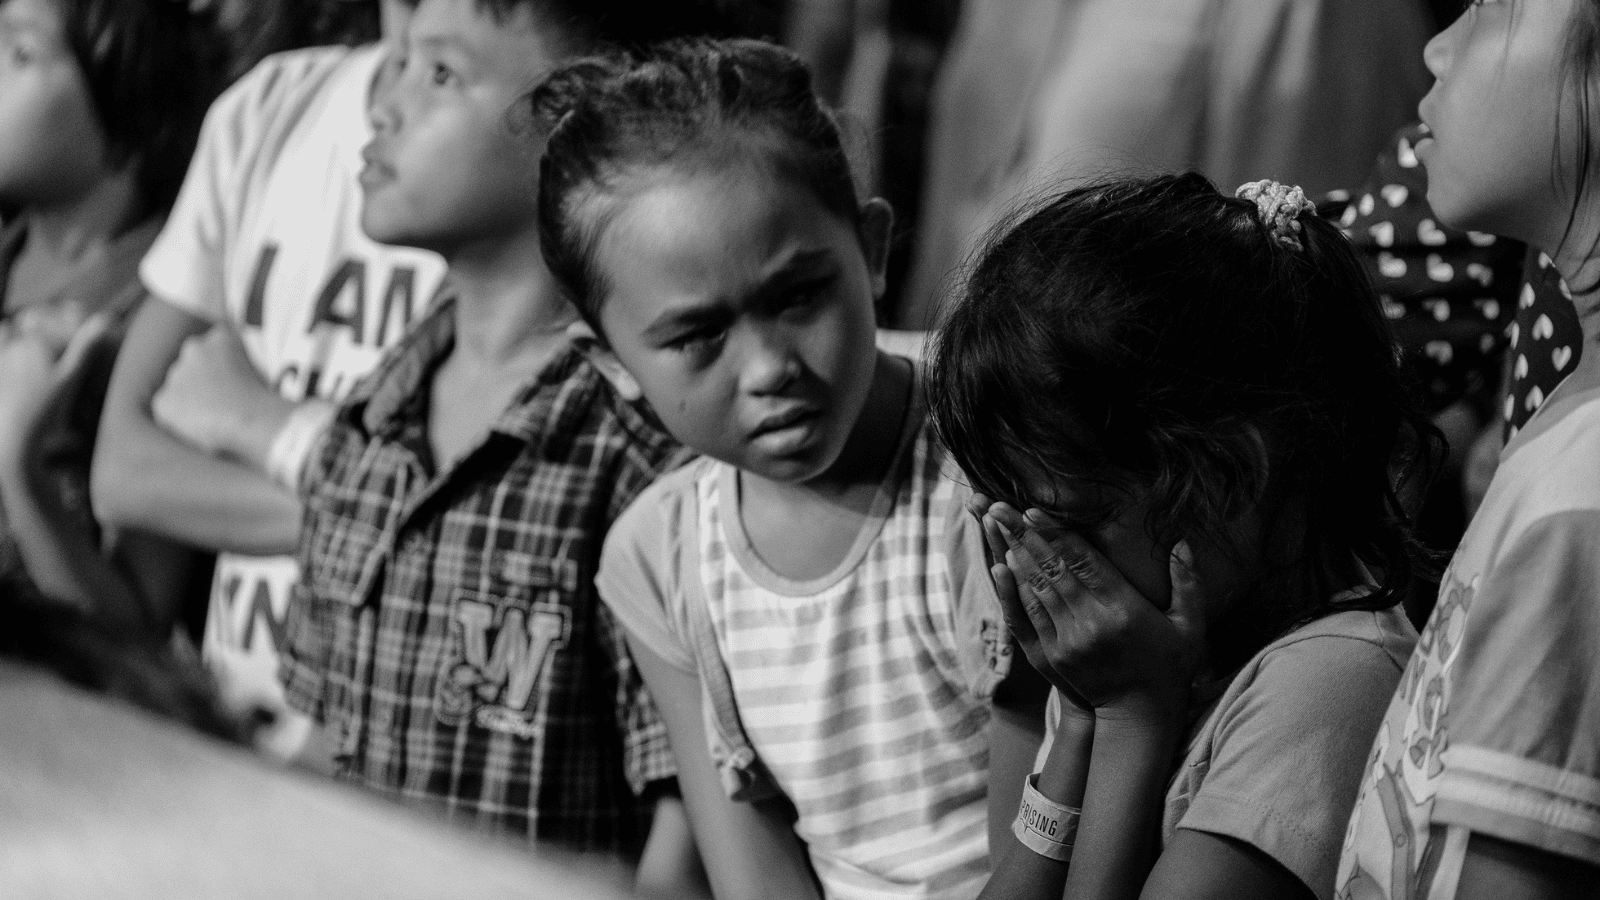 Children sitting at a table with one child crying while another child looks at her